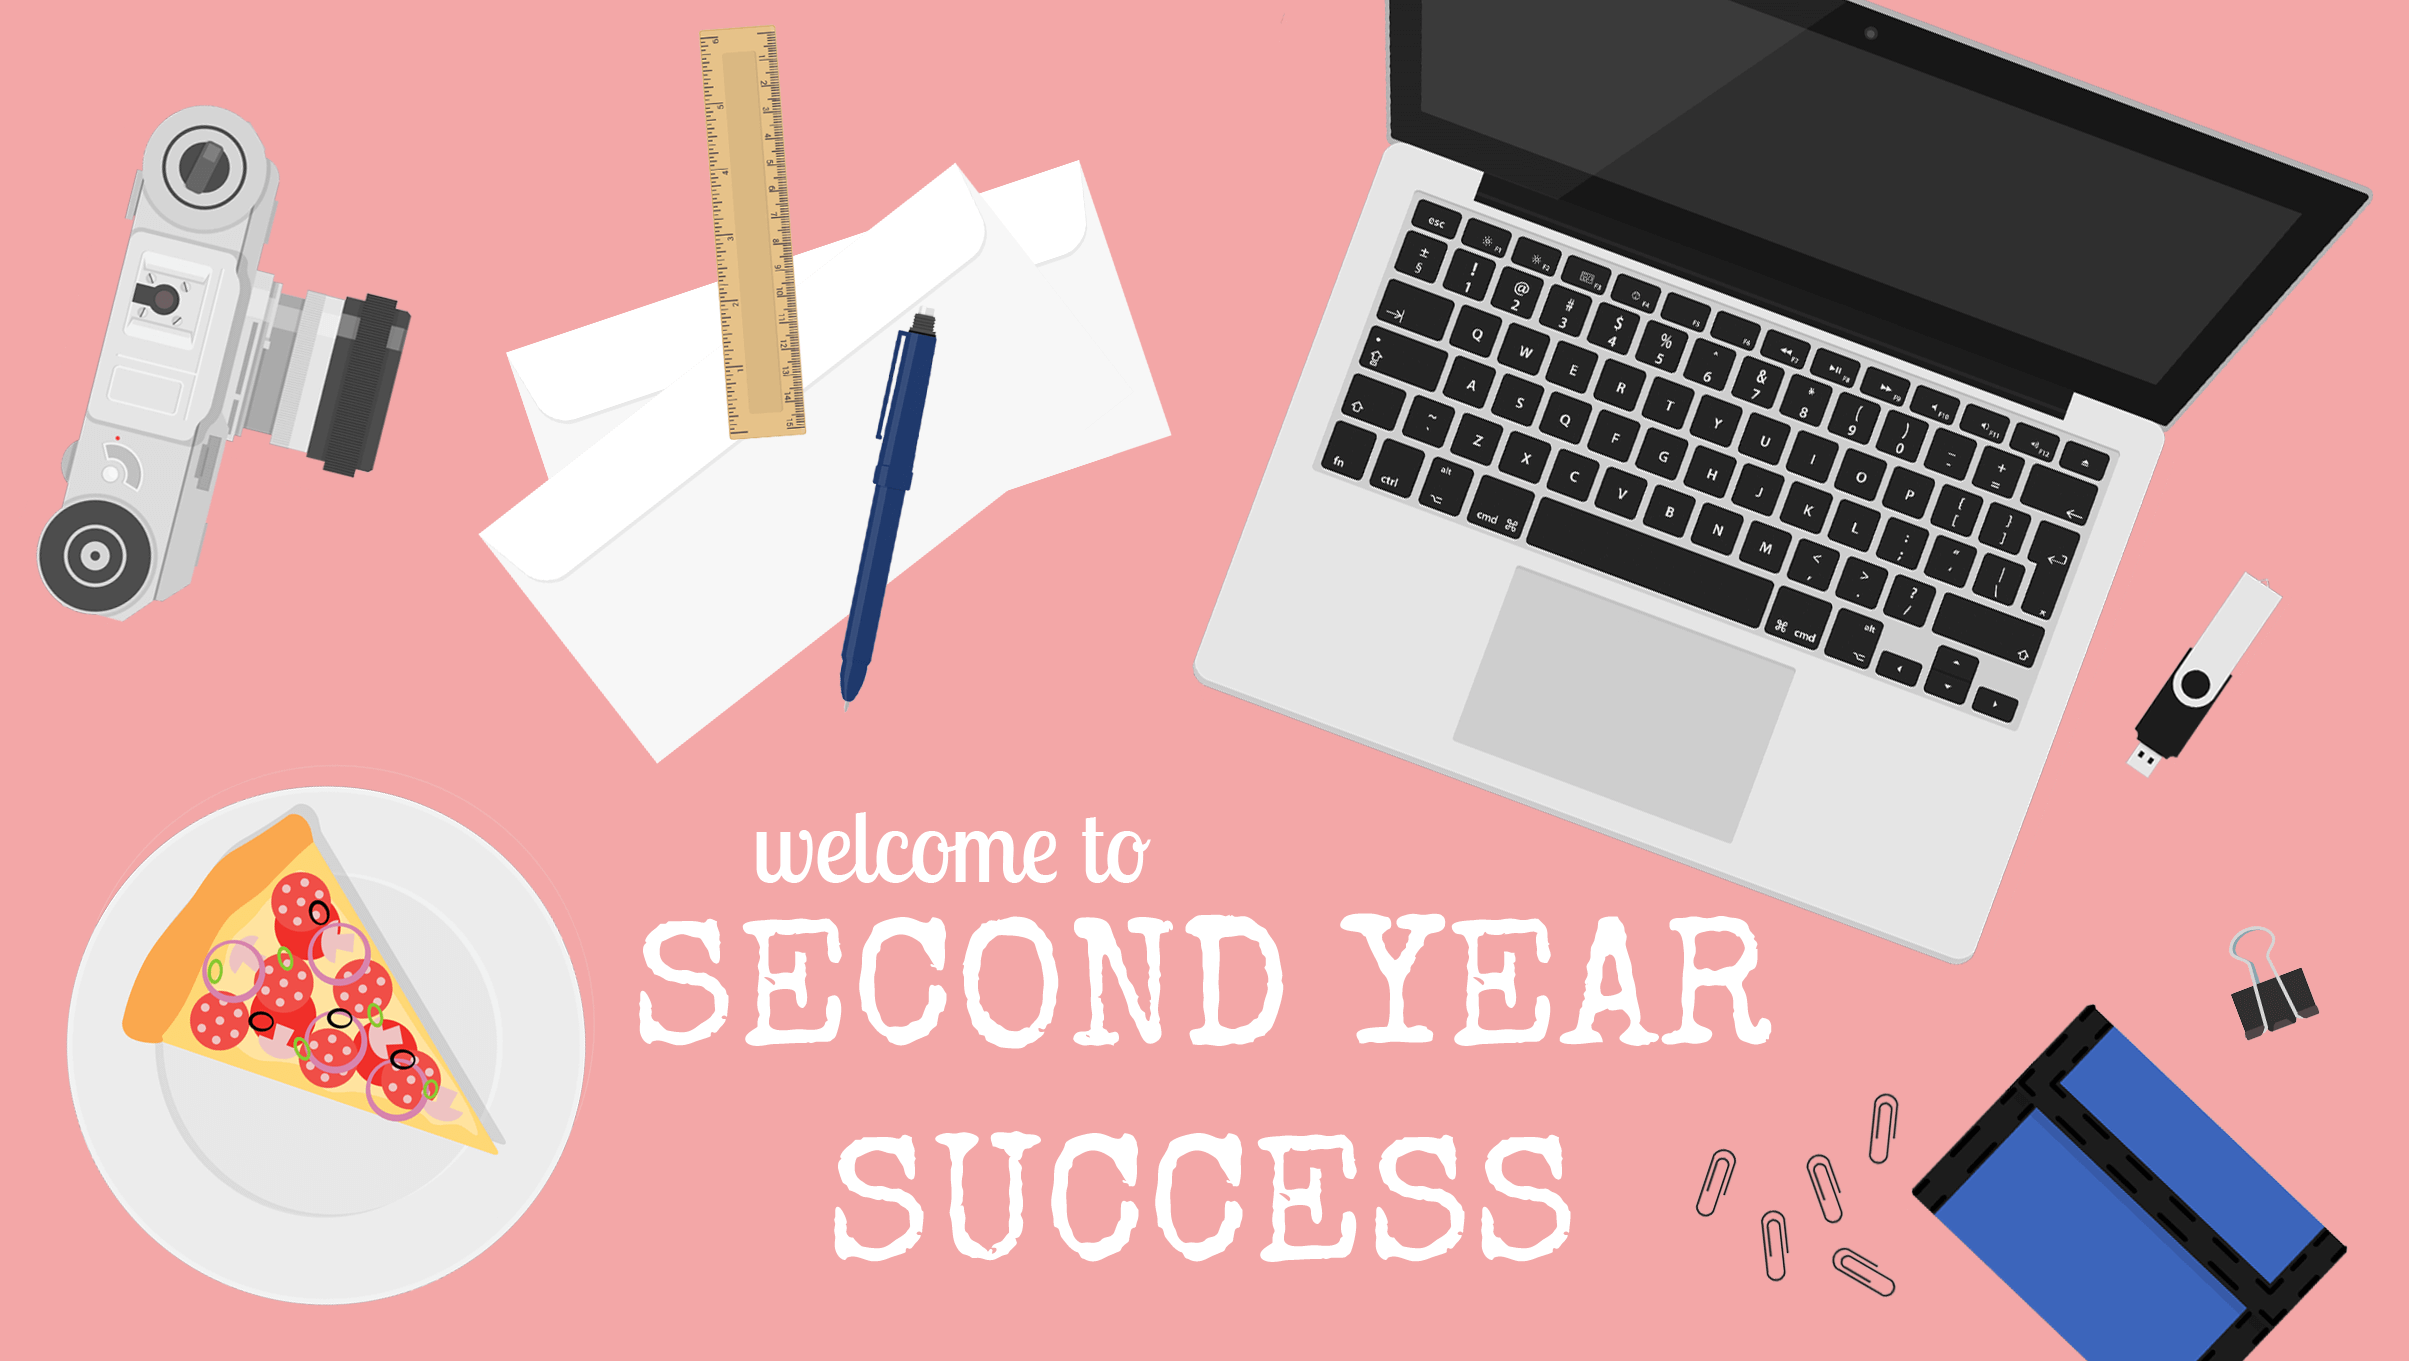 Welcome to Second Year Success